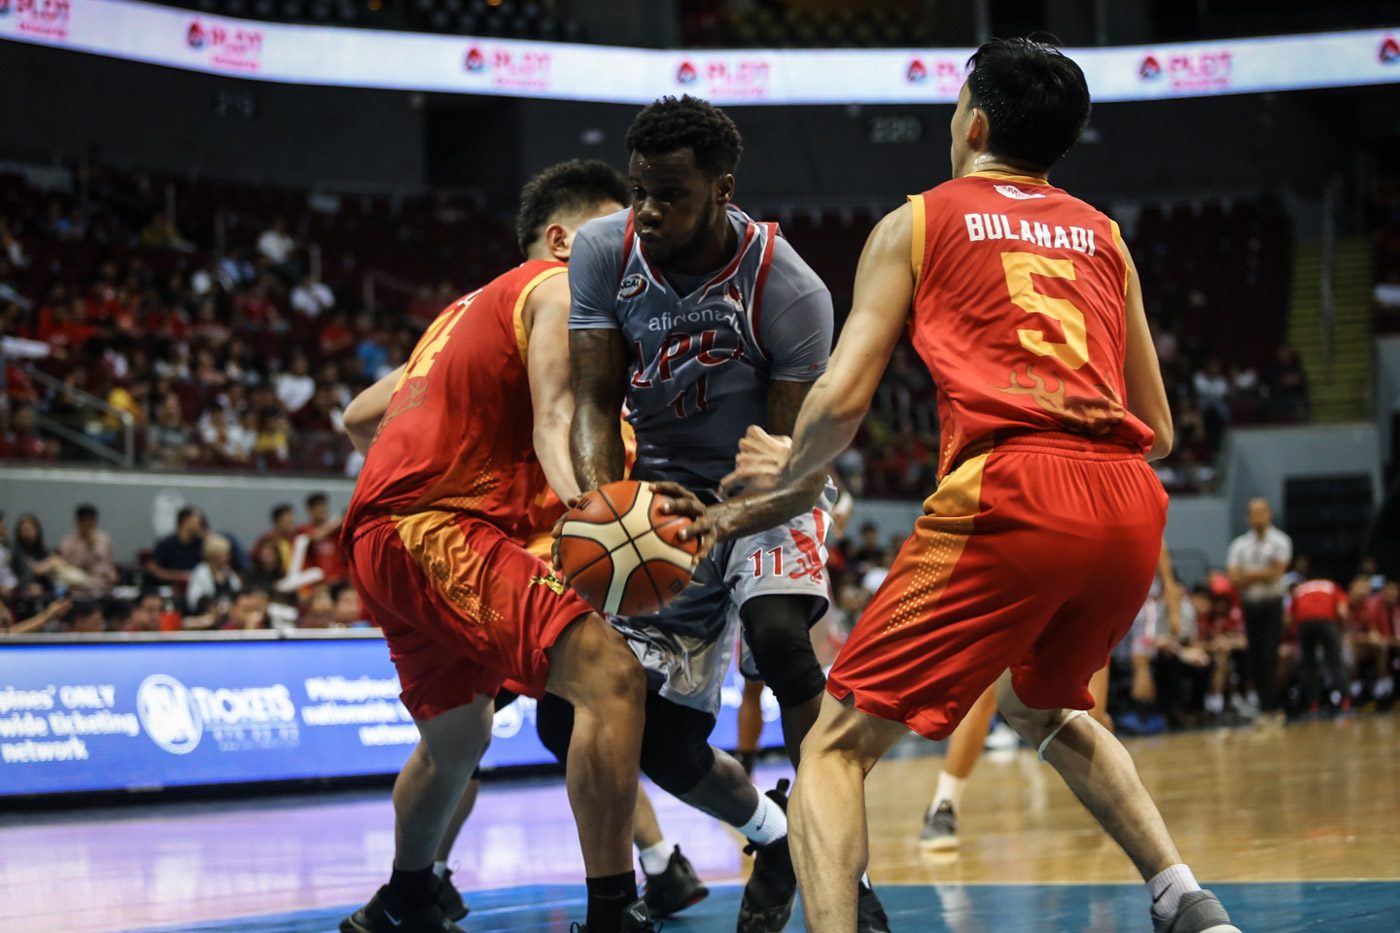 NCAA opener: Pirates survive Stags scare